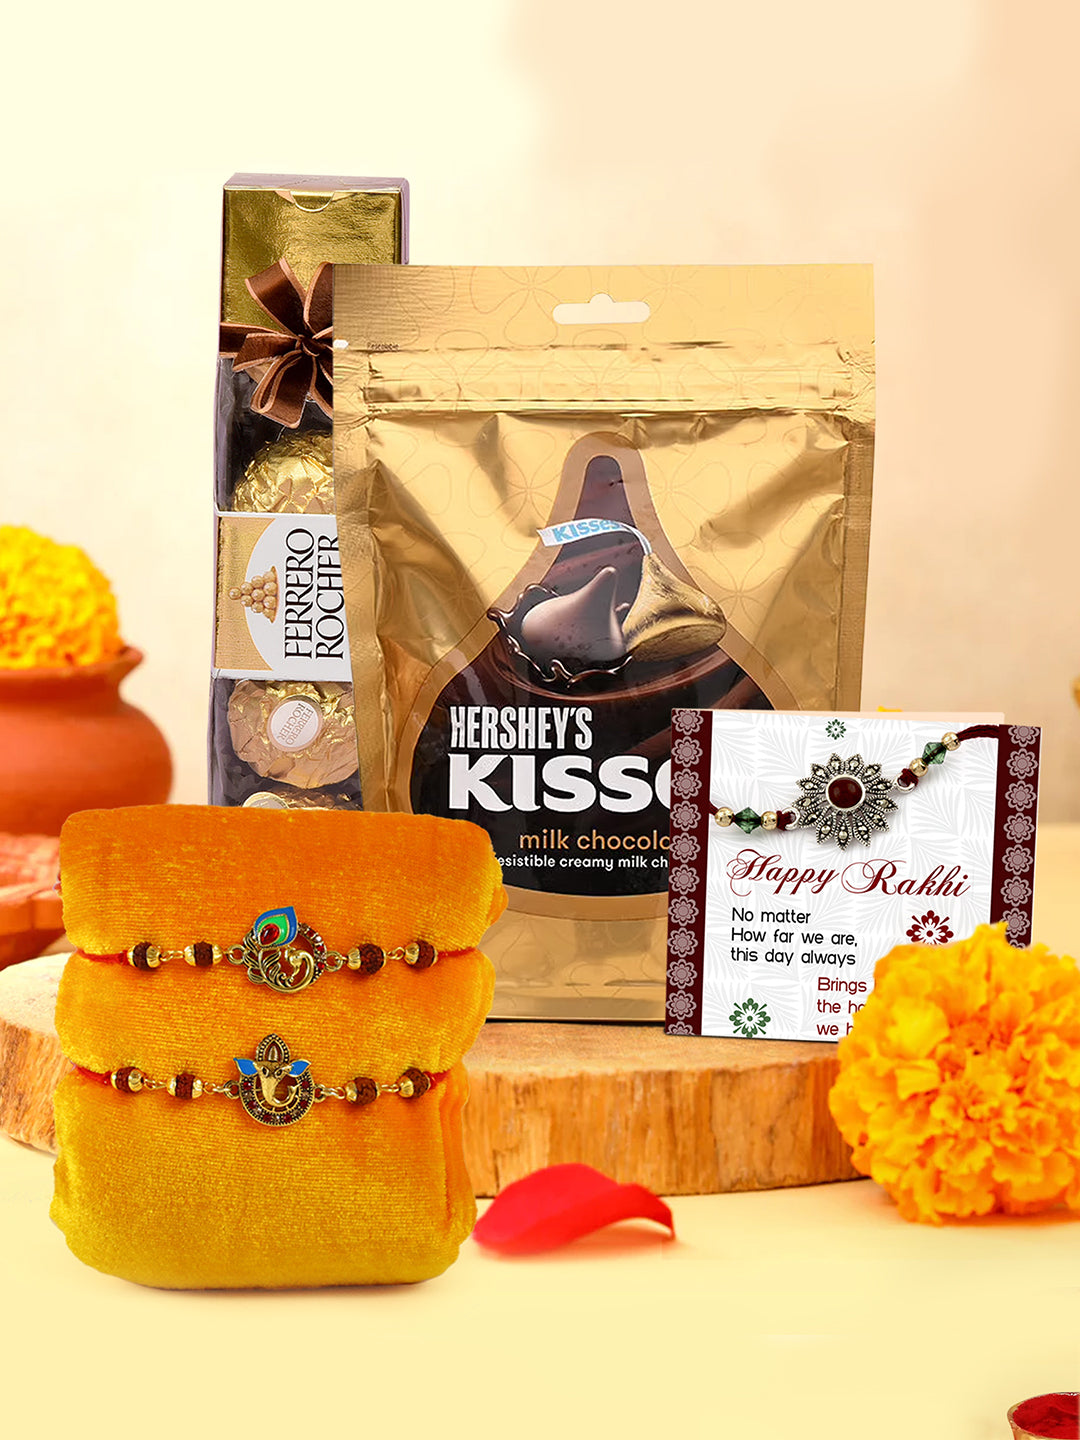 SEND RAKHI GIFTS in USA, Rakhi w/ 4 Silver Coins & Indian Sweets for Brother  or Sister #28567 | Buy Online @ DesiClik.com, USA